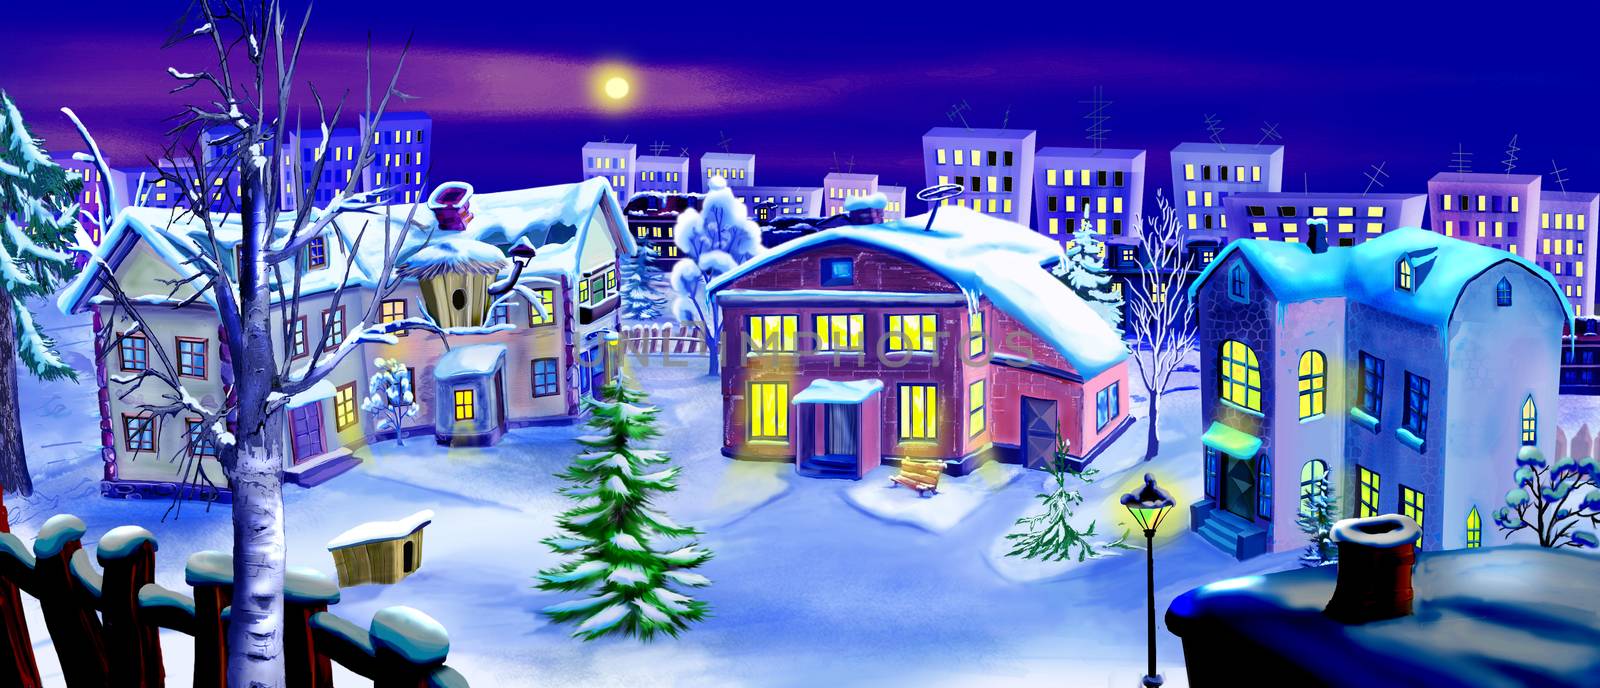 Christmas Eve. Winter Night in a Small Town by Multipedia